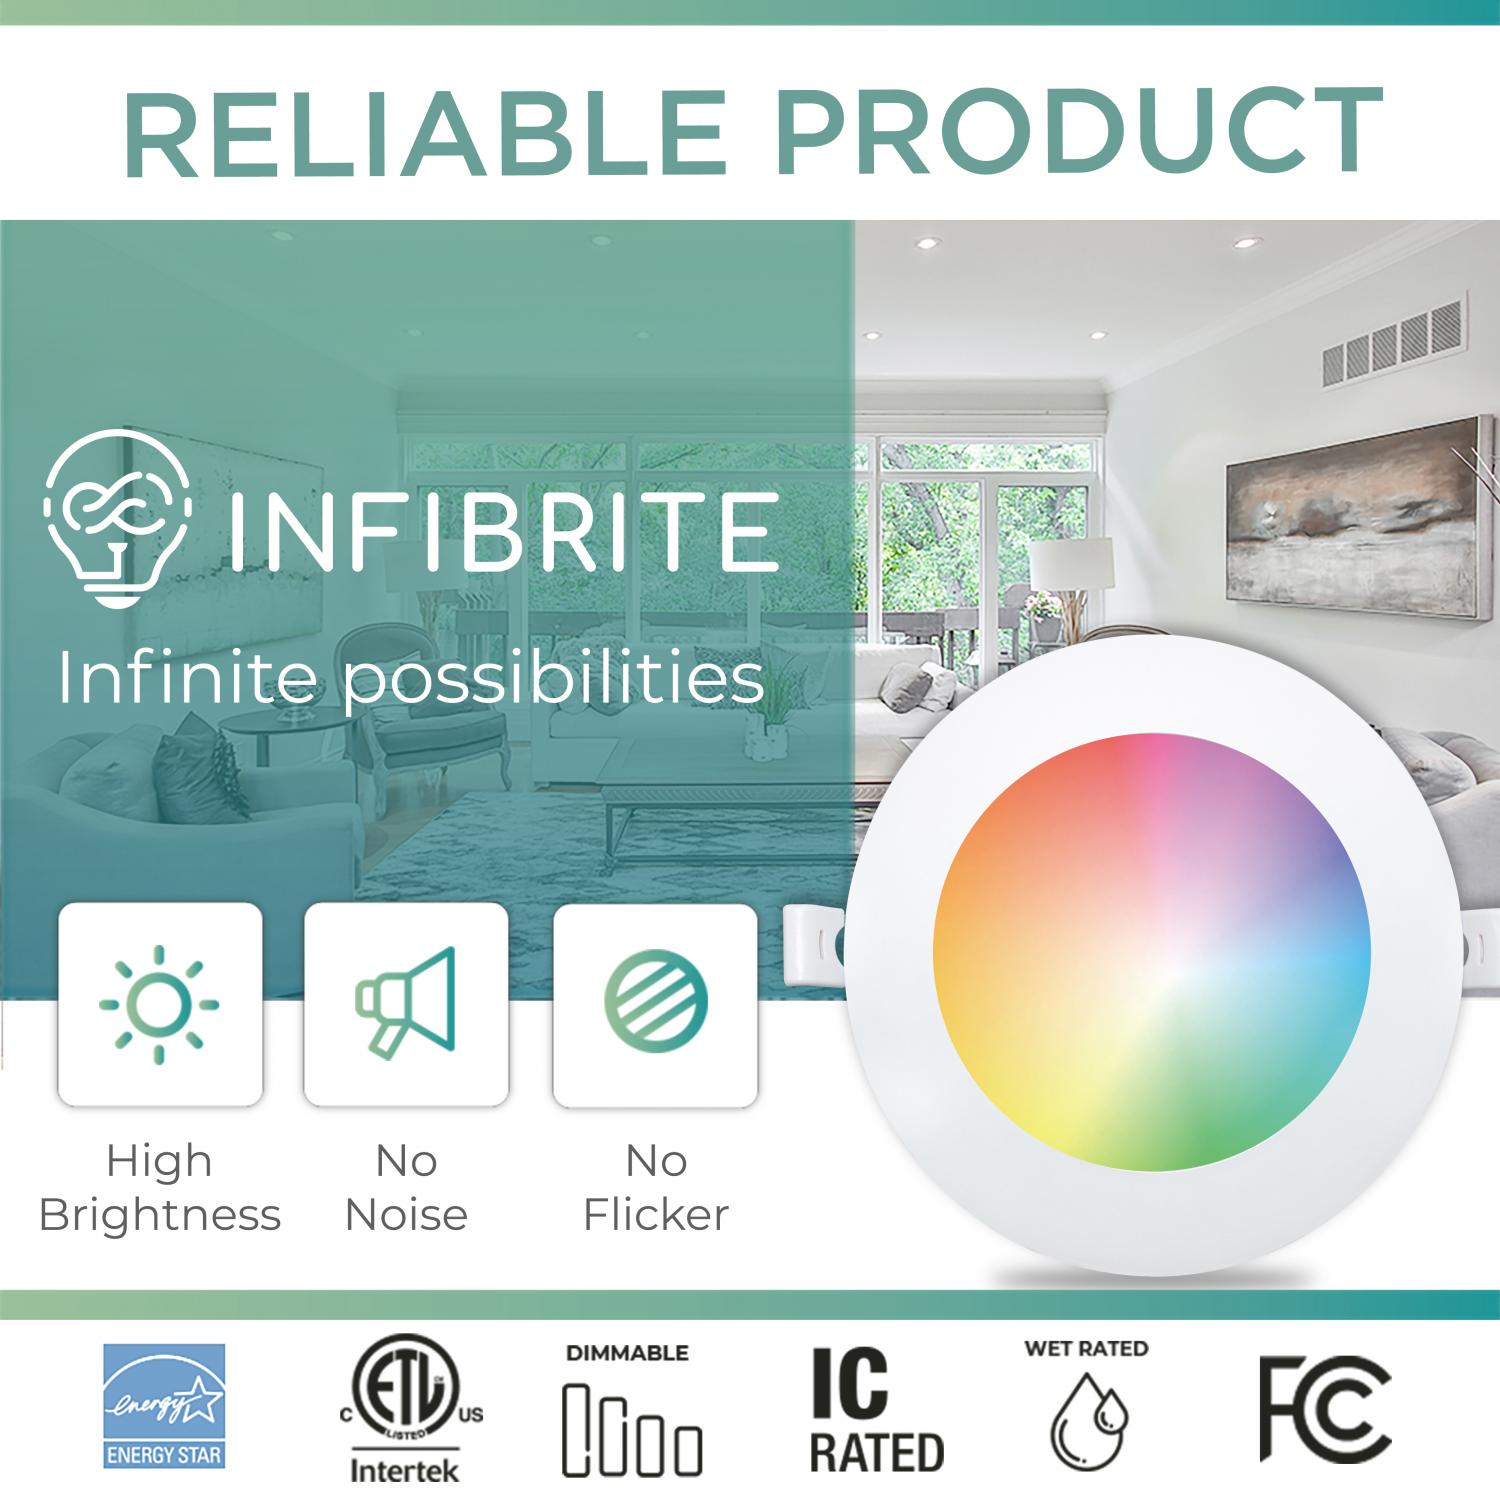 Infibrite 4 Inch Wifi Smart Ultra-Slim LED Ceiling Mount Recessed Light 9W 810LM Dimmable Retrofit with Junction Box, Easy Install, App & Voice Control, Alexa/Google Compatible, ETL & Energy Star, Wet Rated (12 Pack)